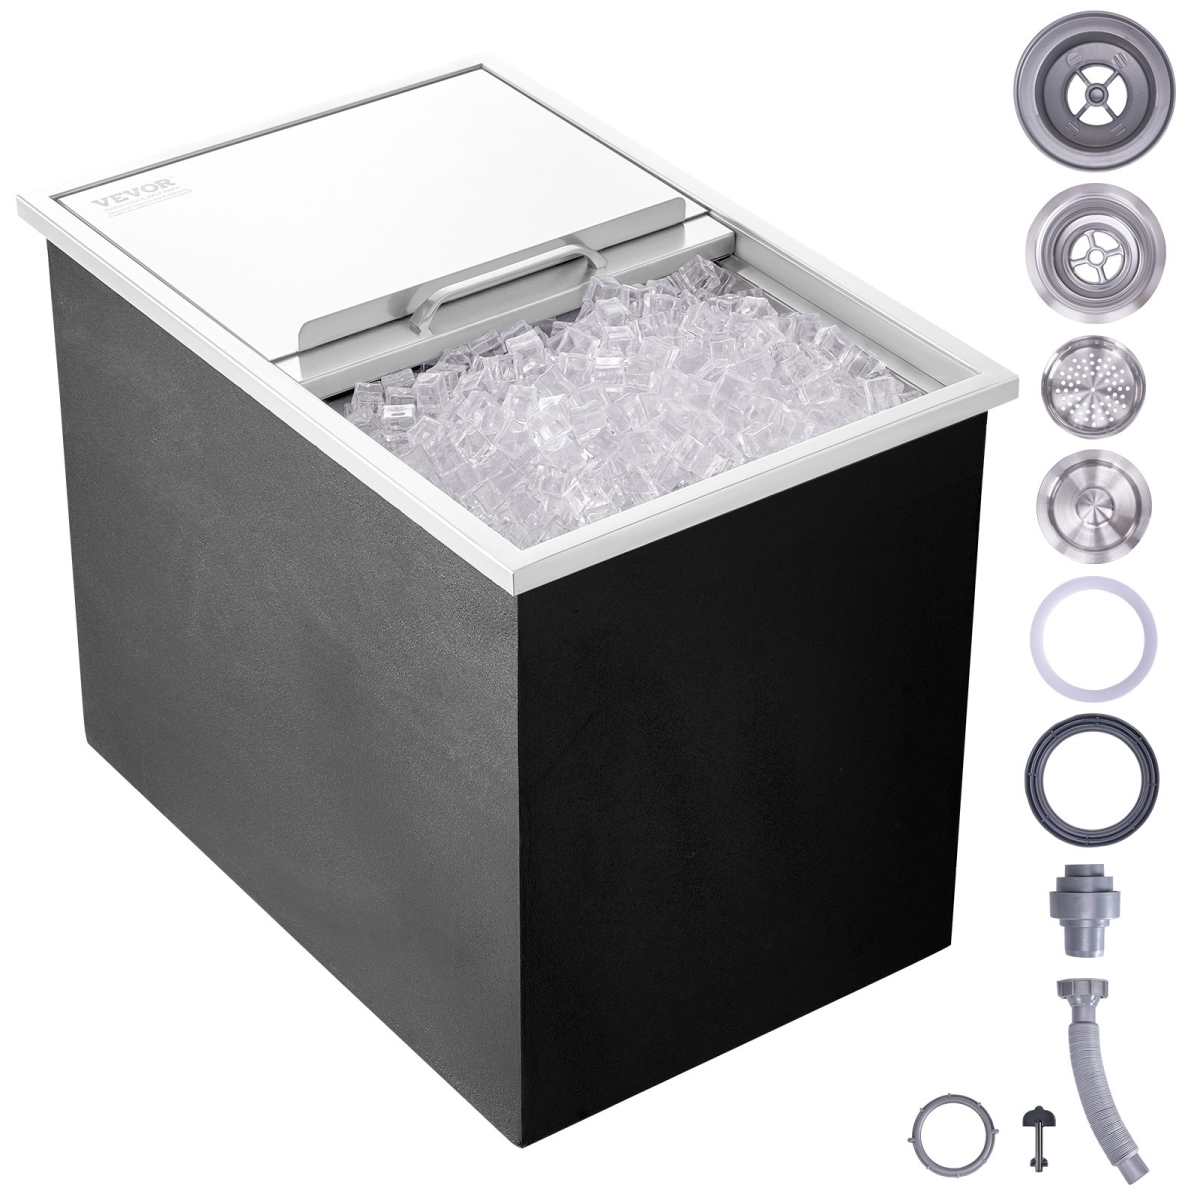 Picture of Vevor QRSCBCHG27LXXJVXNV0 27 x 18 x 21 in. Drop in Chest Stainless Steel Ice Cooler with Commercial Ice Bin with Sliding Cover & 40.9 qt. Outdoor Kitchen Ice Bar for Cold Wine Beer